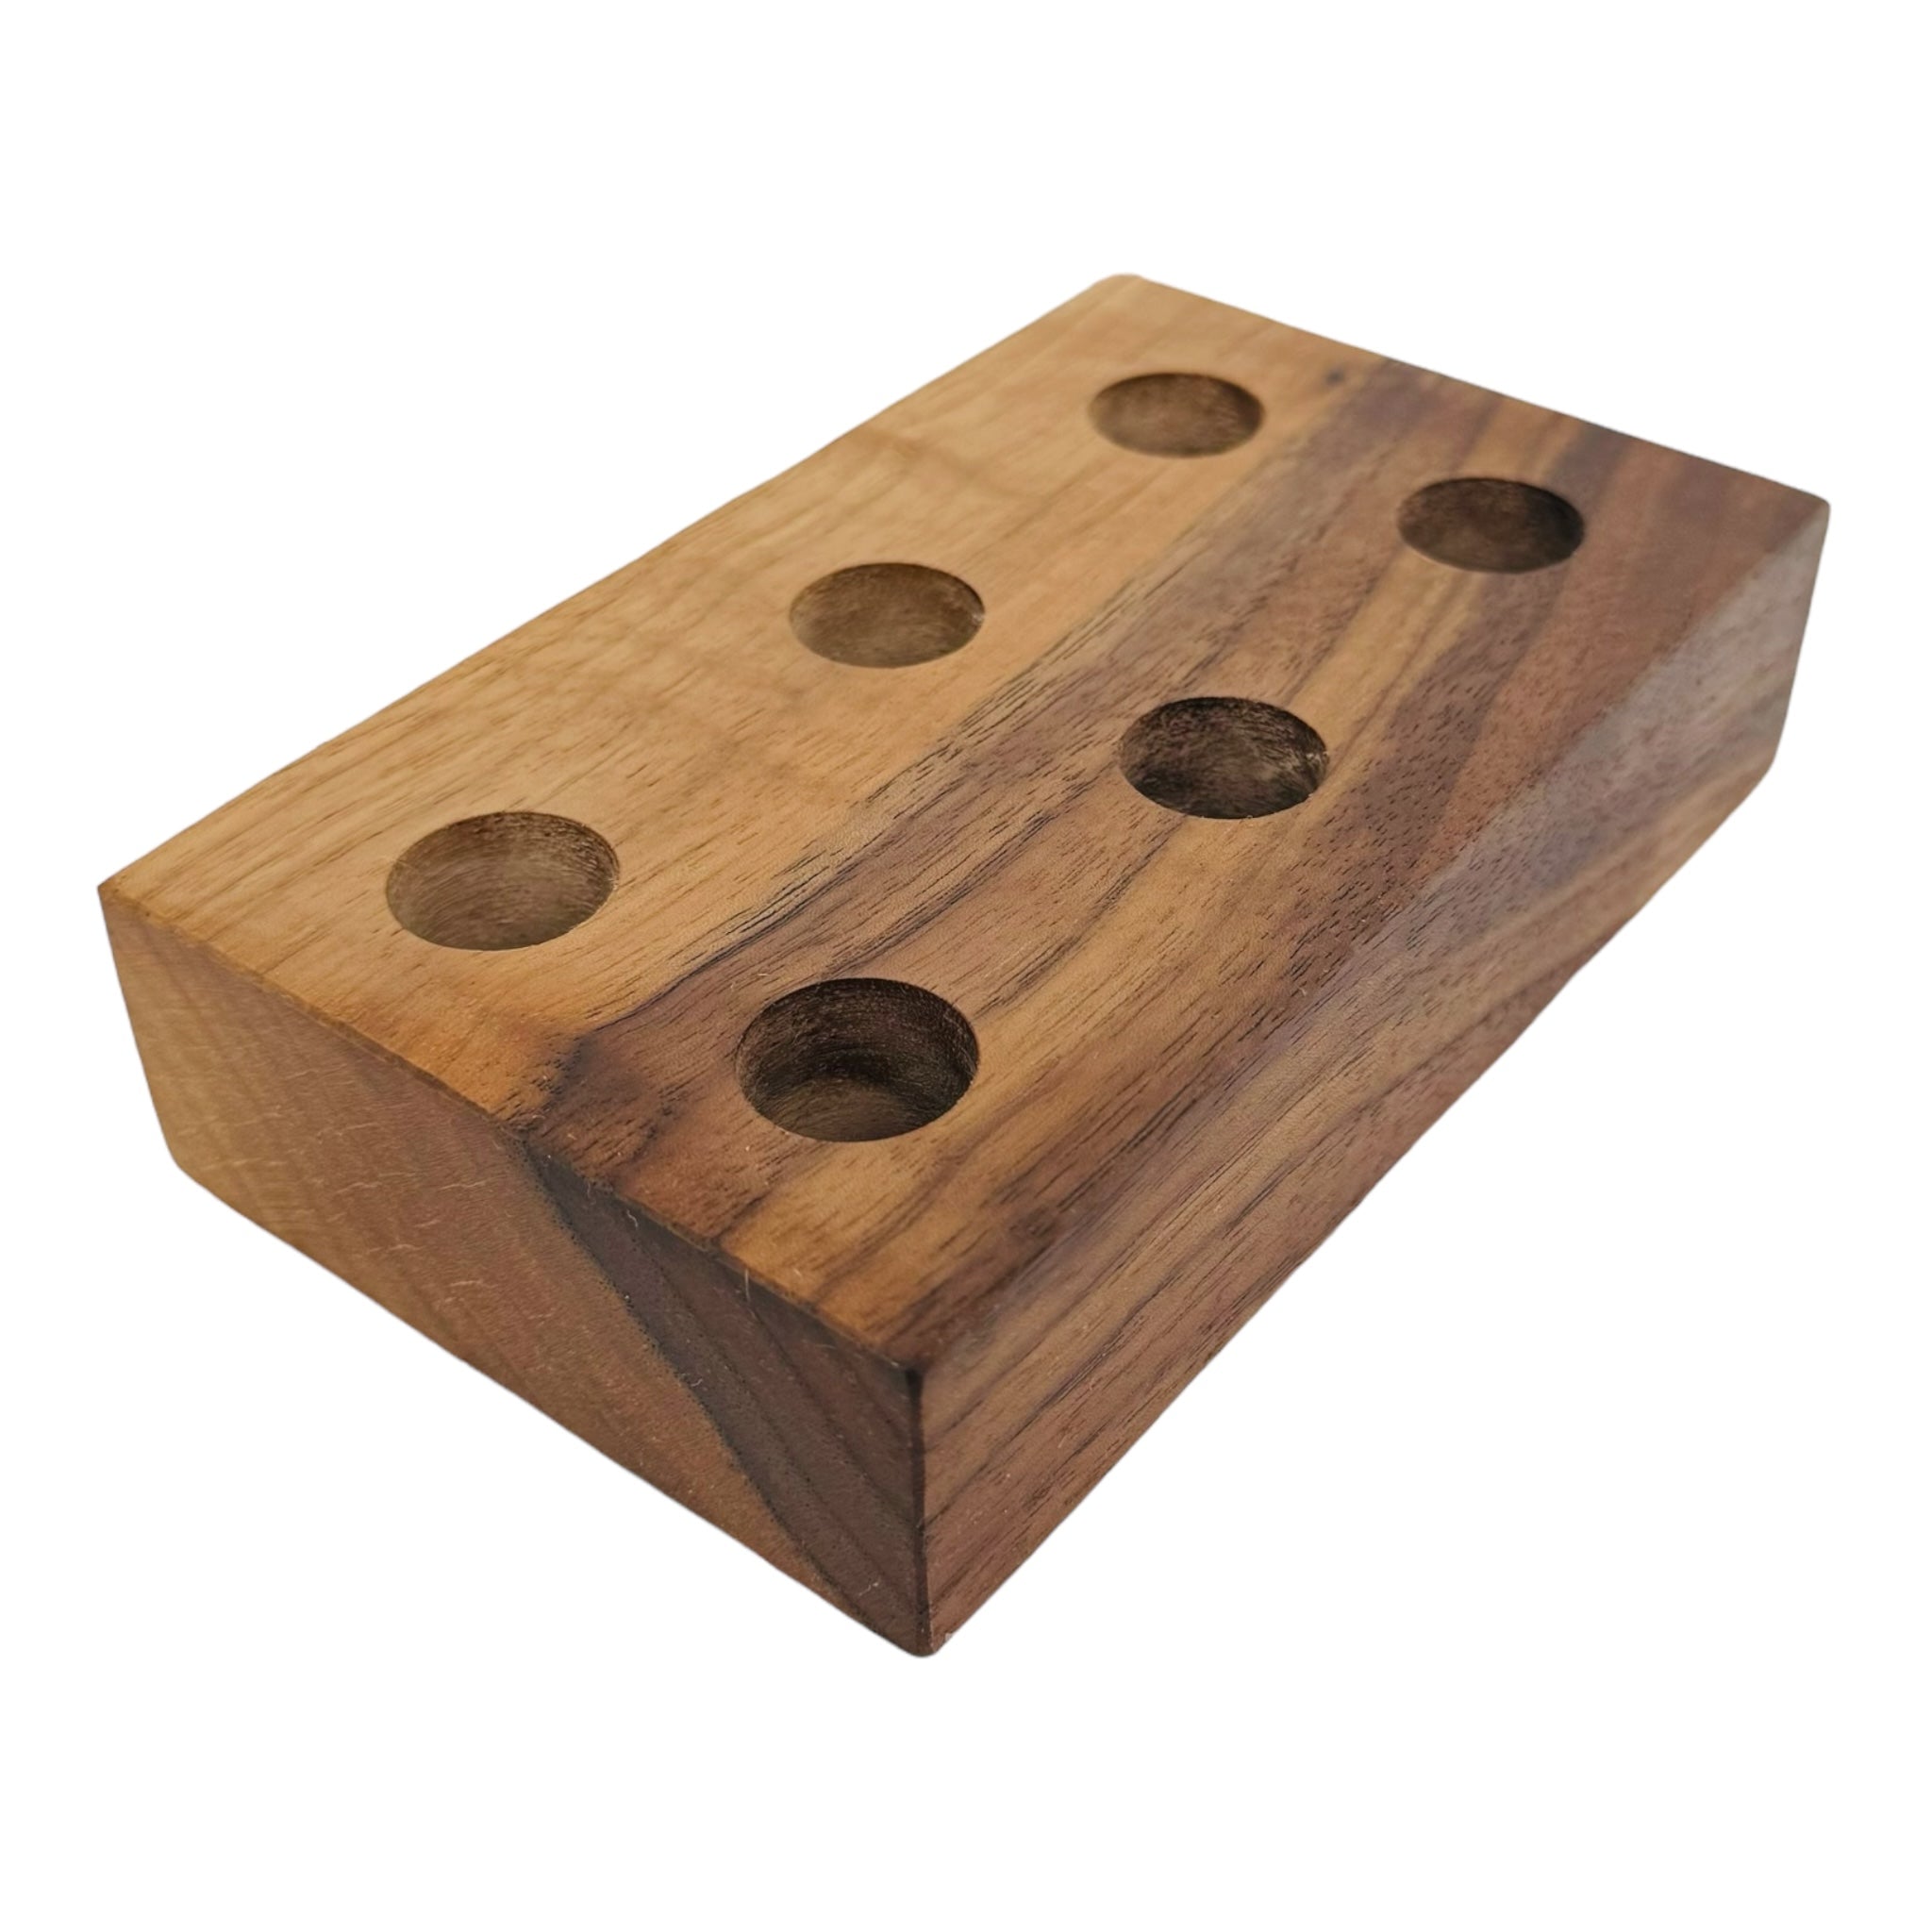 6 Hole Wood Display Stand Holder For 18mm Bong Bowl Pieces Or Quartz Bangers - Black Walnut